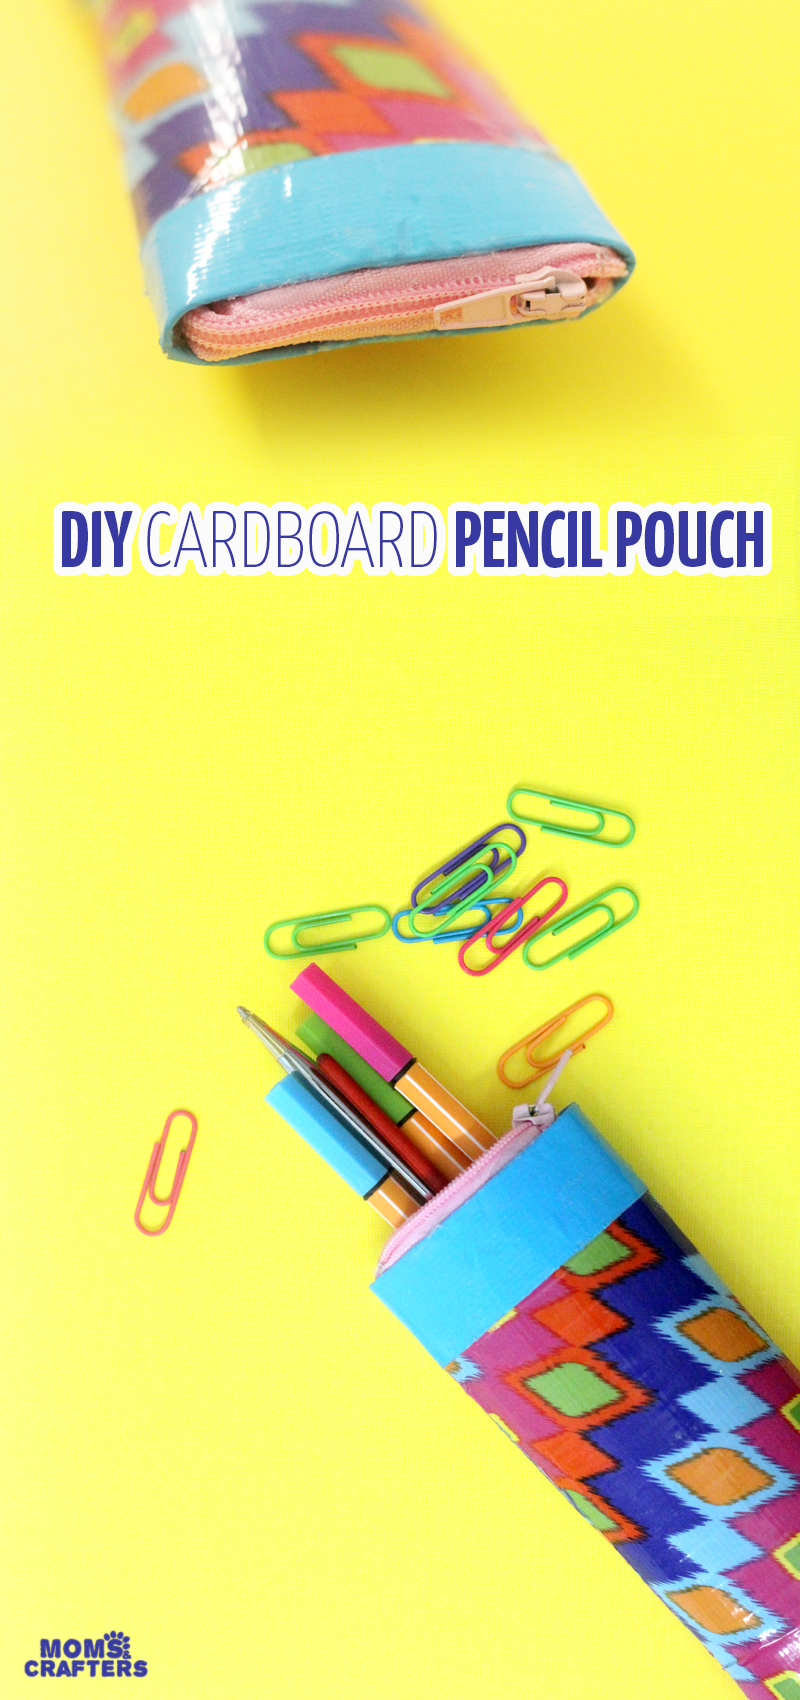 DIY Pencil Case Roll Up: A Step-by-Step Guide - The Creative Mom